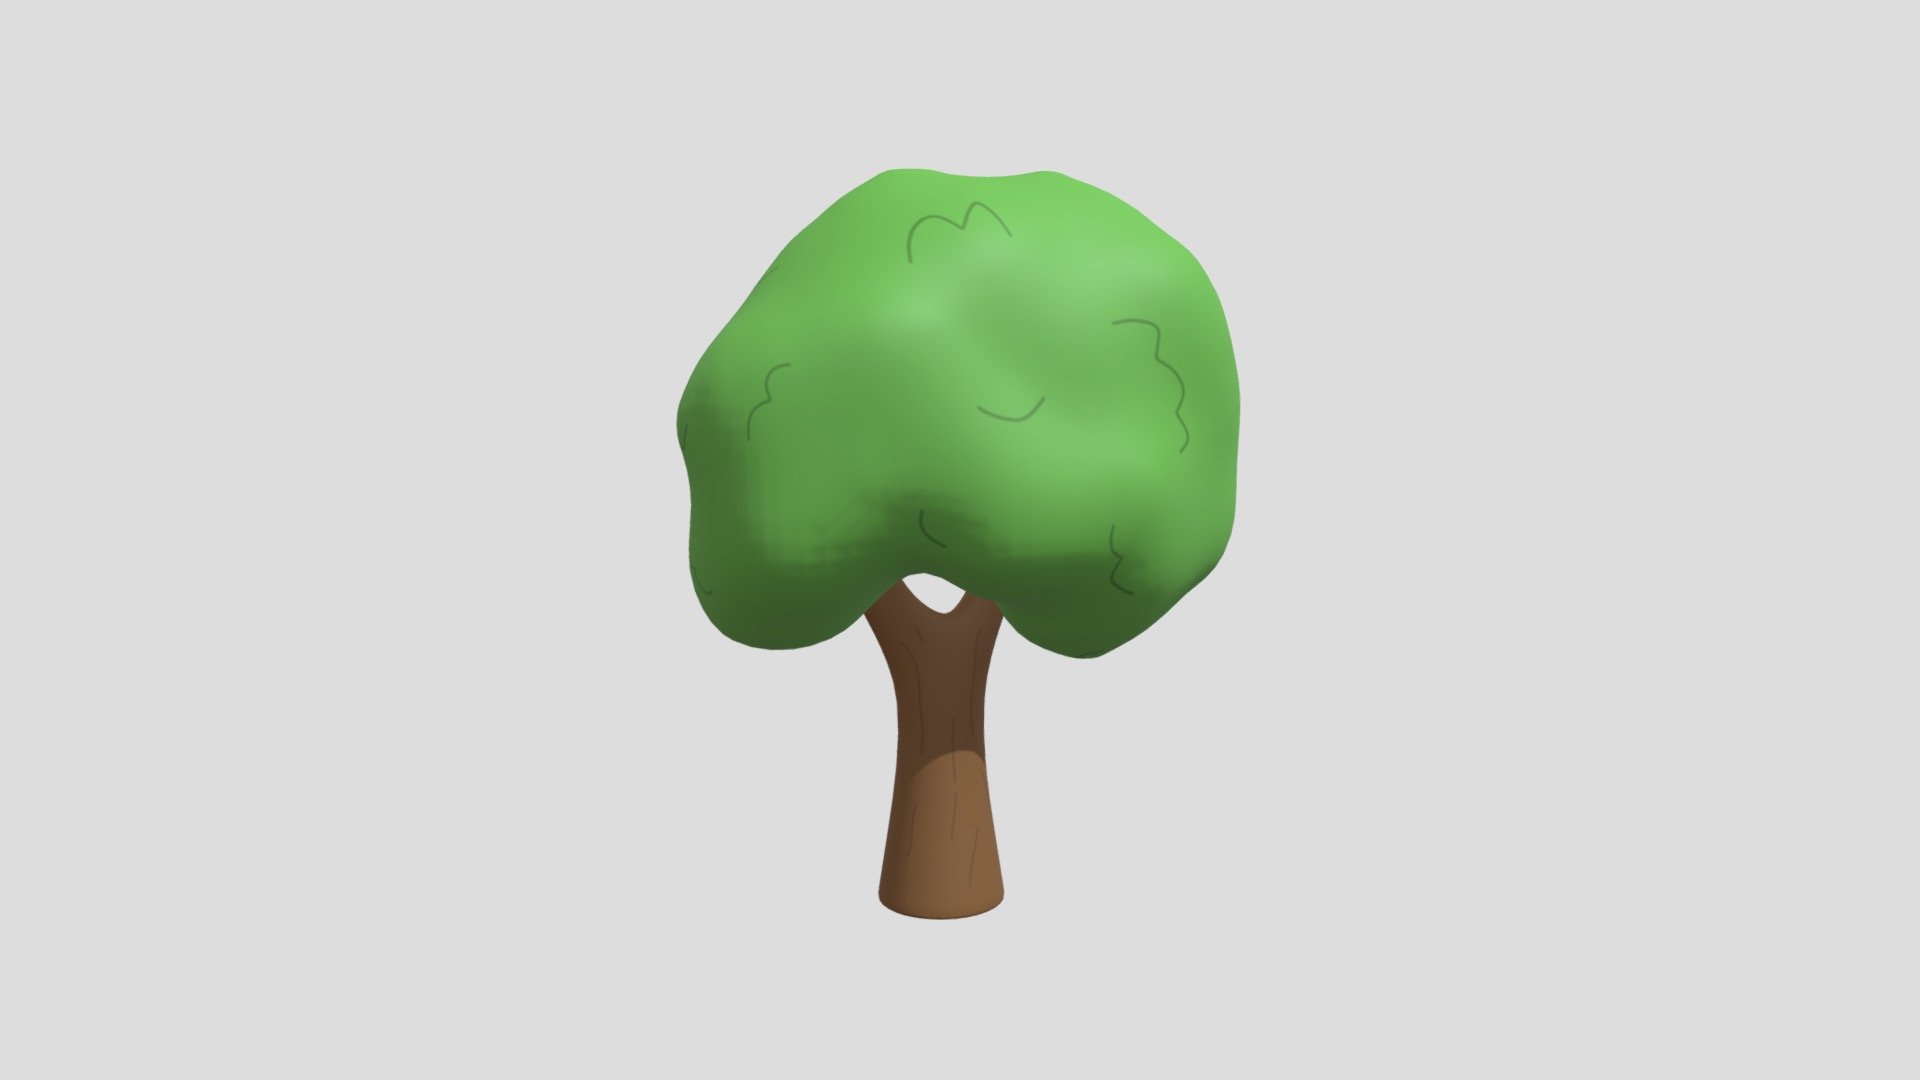 Textures: 1024 x 1024, Two colors on texture: Brown and green.

Materials: 1 - Toon Tree

One model with 4 shapes.

Smooth shaded.

Non-Mirrored.

Subdivision Level: 1

Origin located on bottom-center.

Polygons: 8716

Vertices: 4362

Formats: Fbx, Obj, Stl, Dae.

I hope you enjoy the model! - Toon Tree - Buy Royalty Free 3D model by Ed+ (@EDplus) 3d model